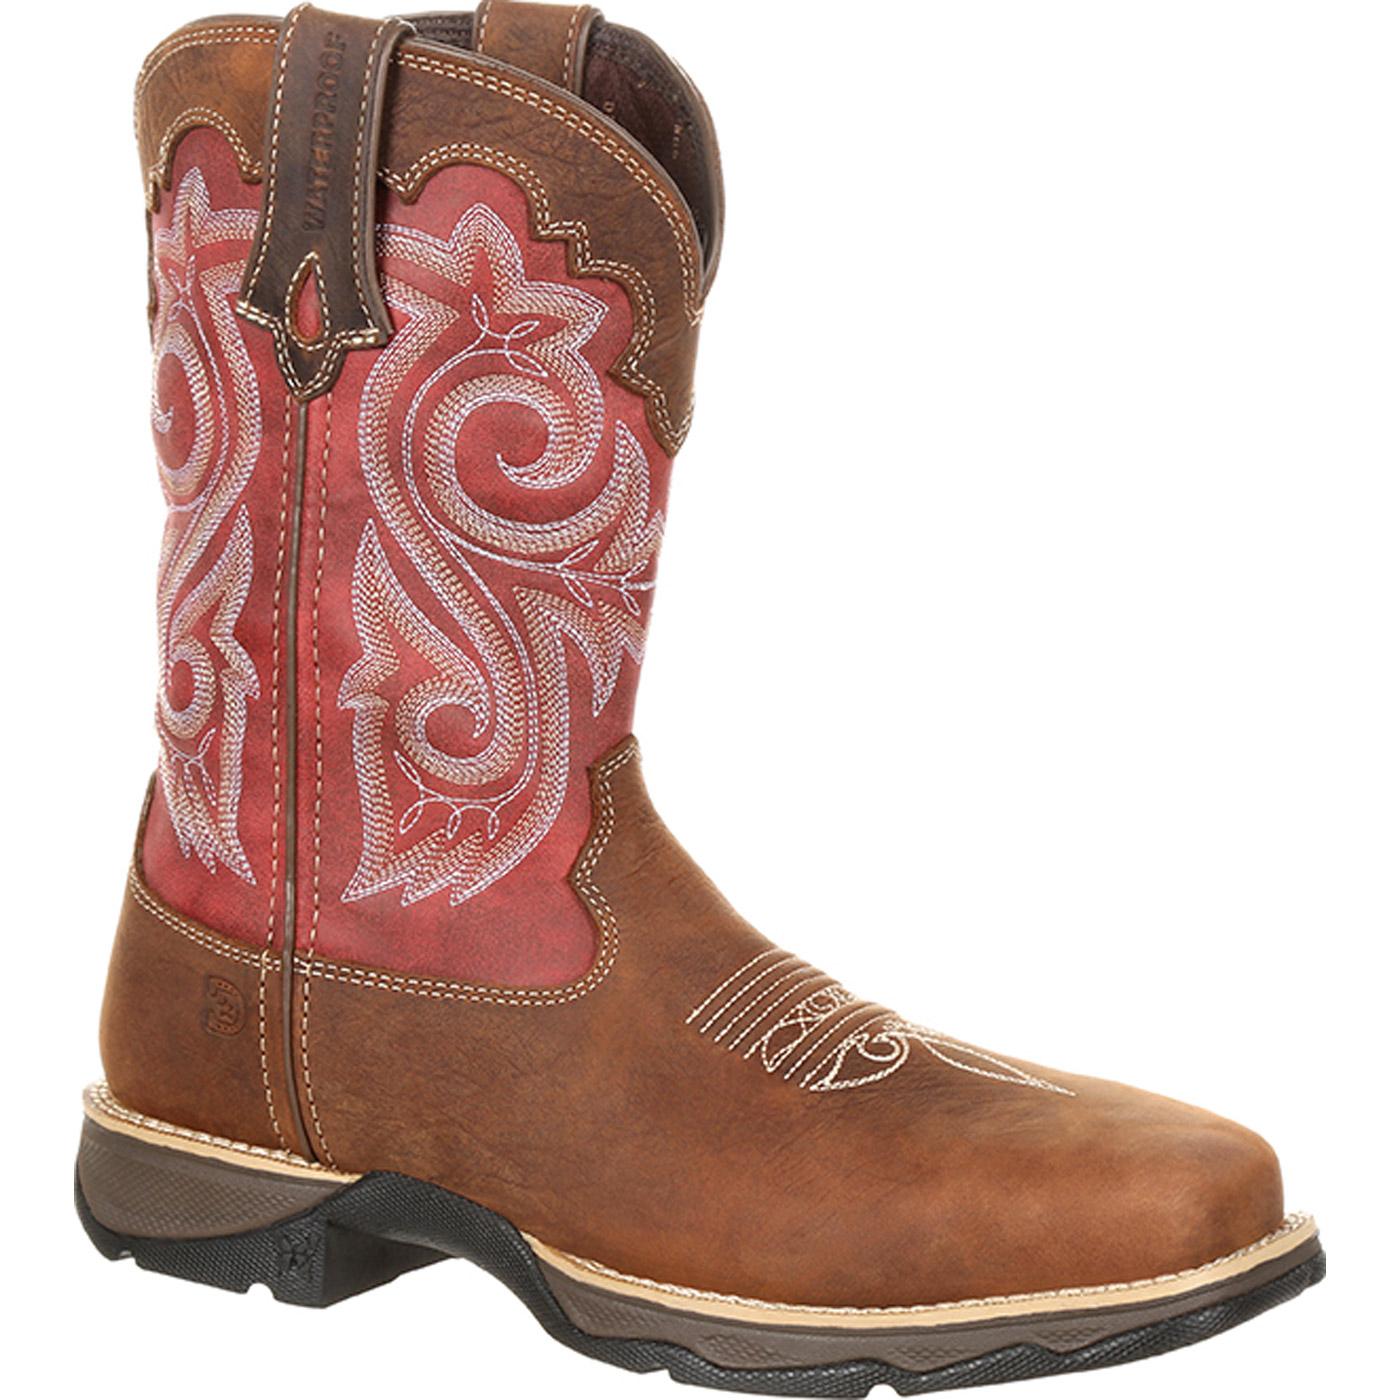  Georgia Women's Red Cowboy Boots Red / 9.5